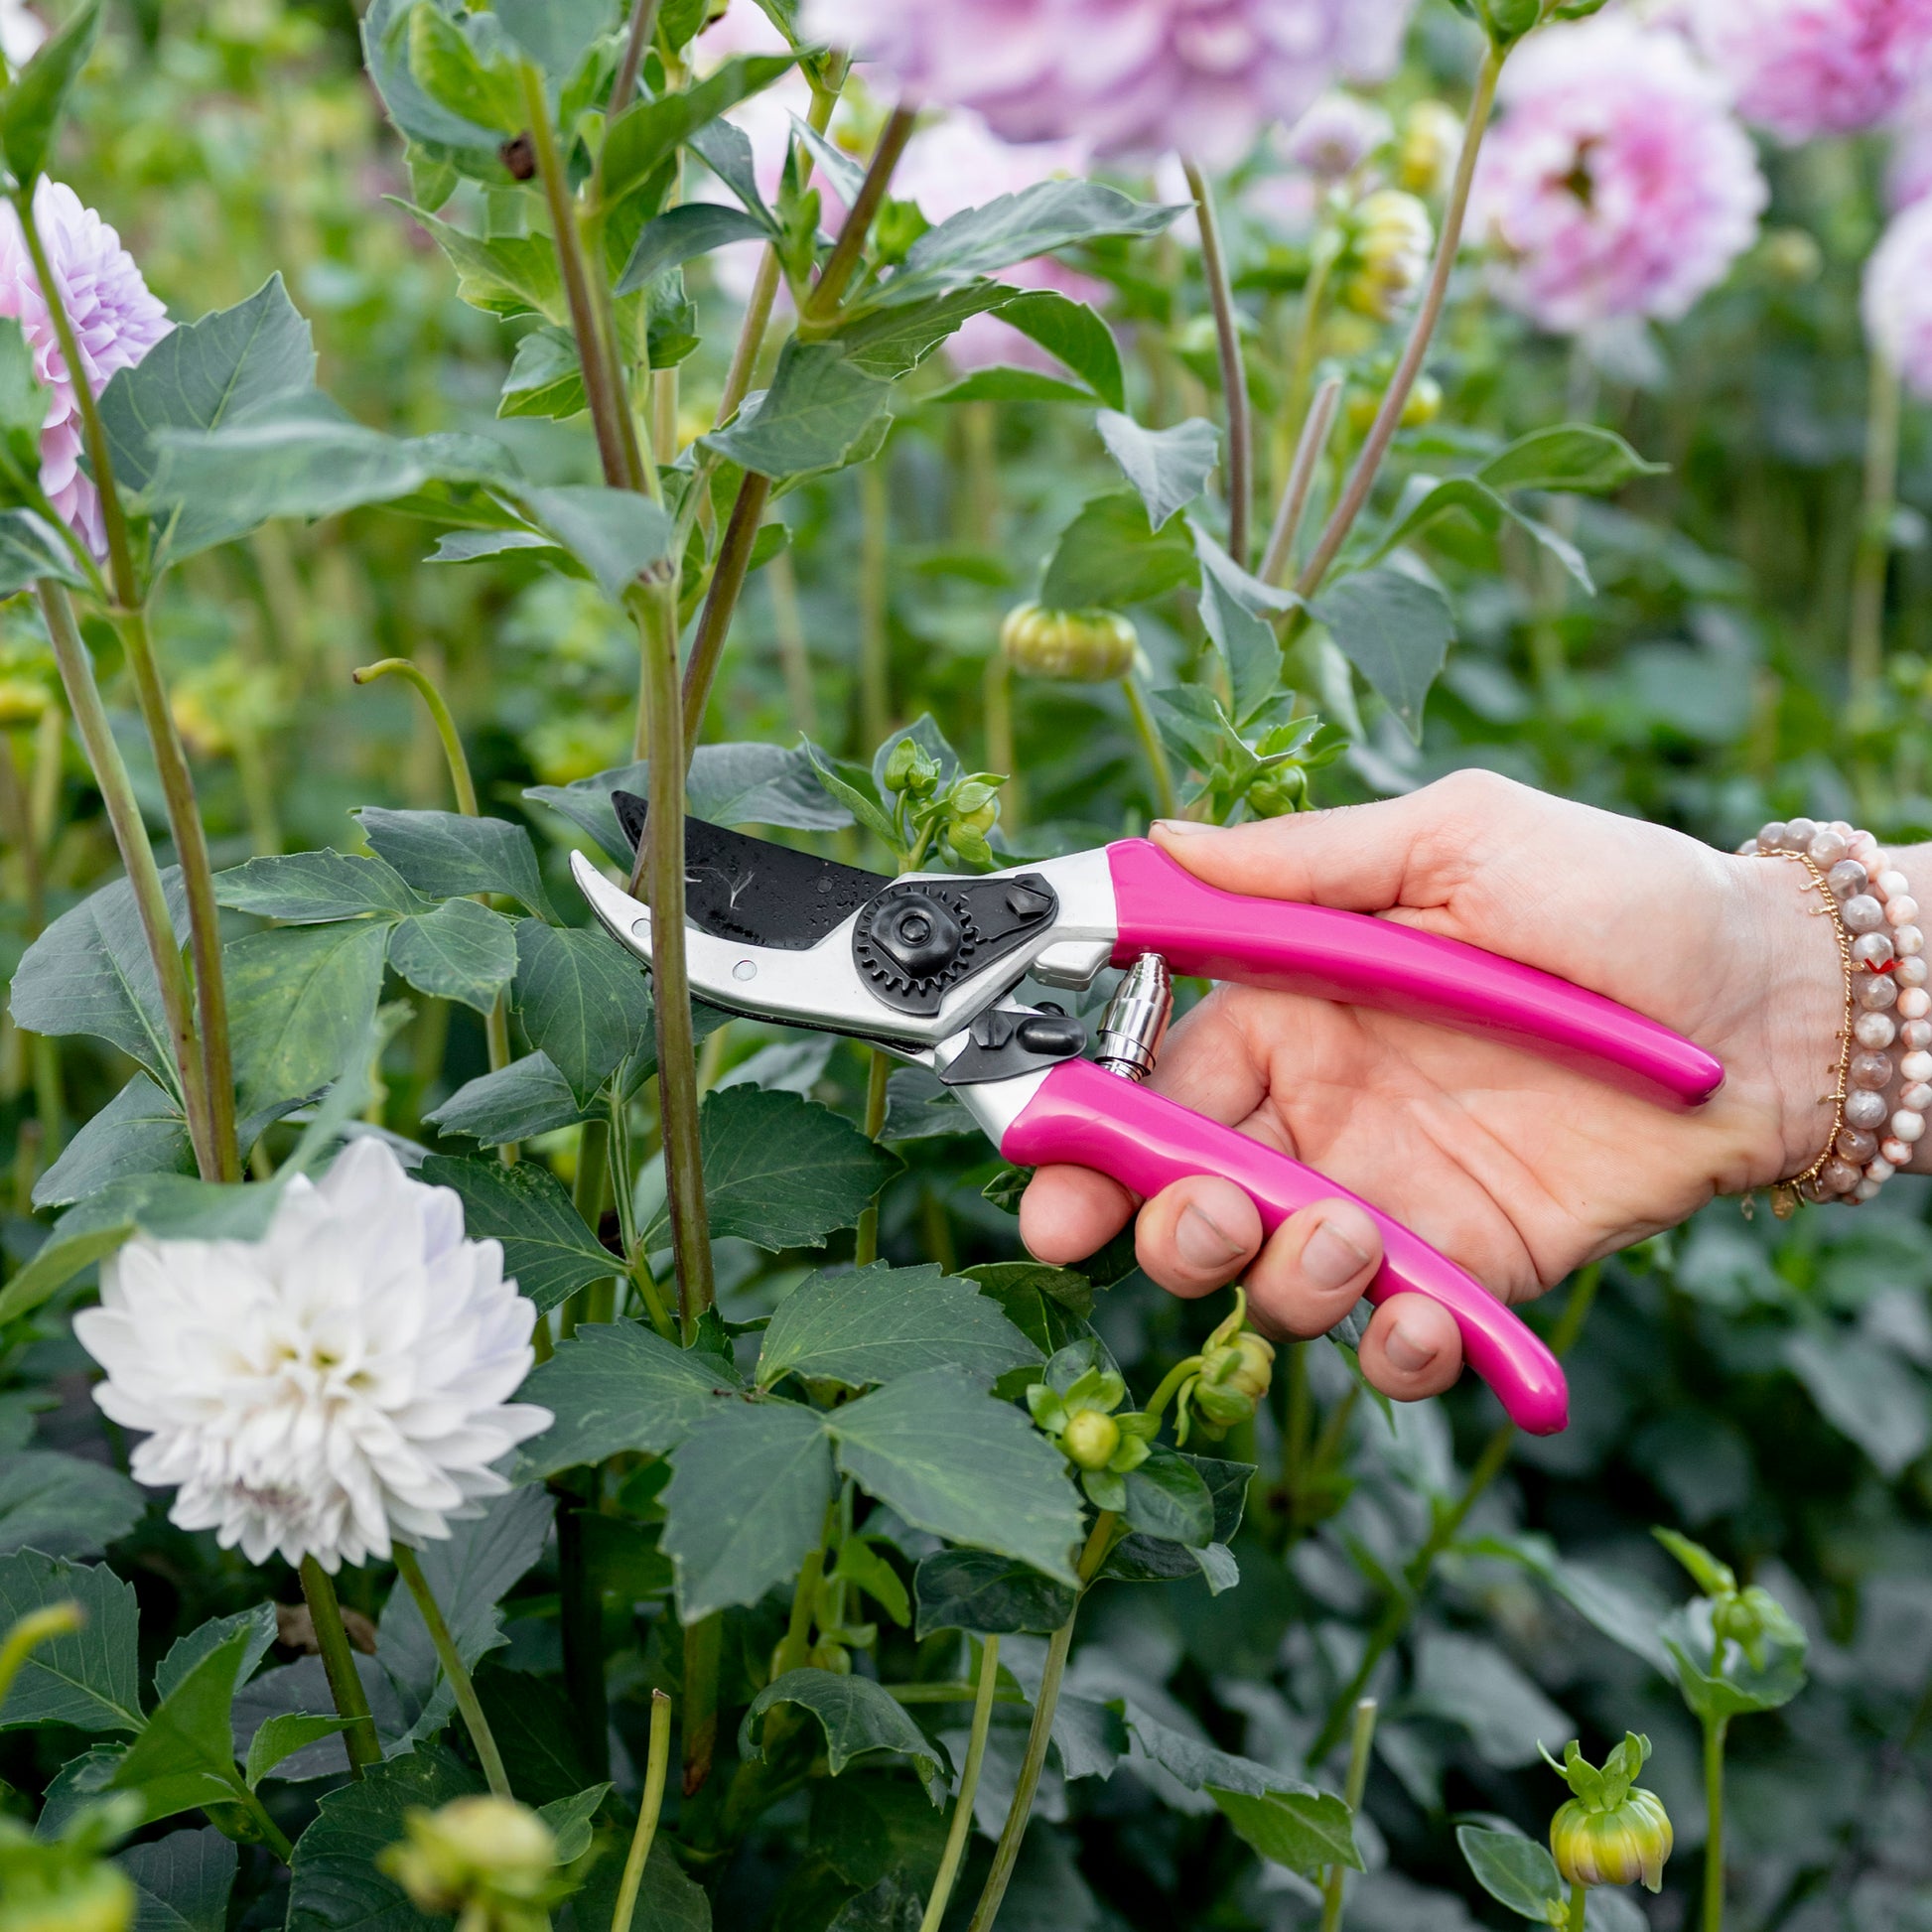 person cutting flowers with pink secateurs